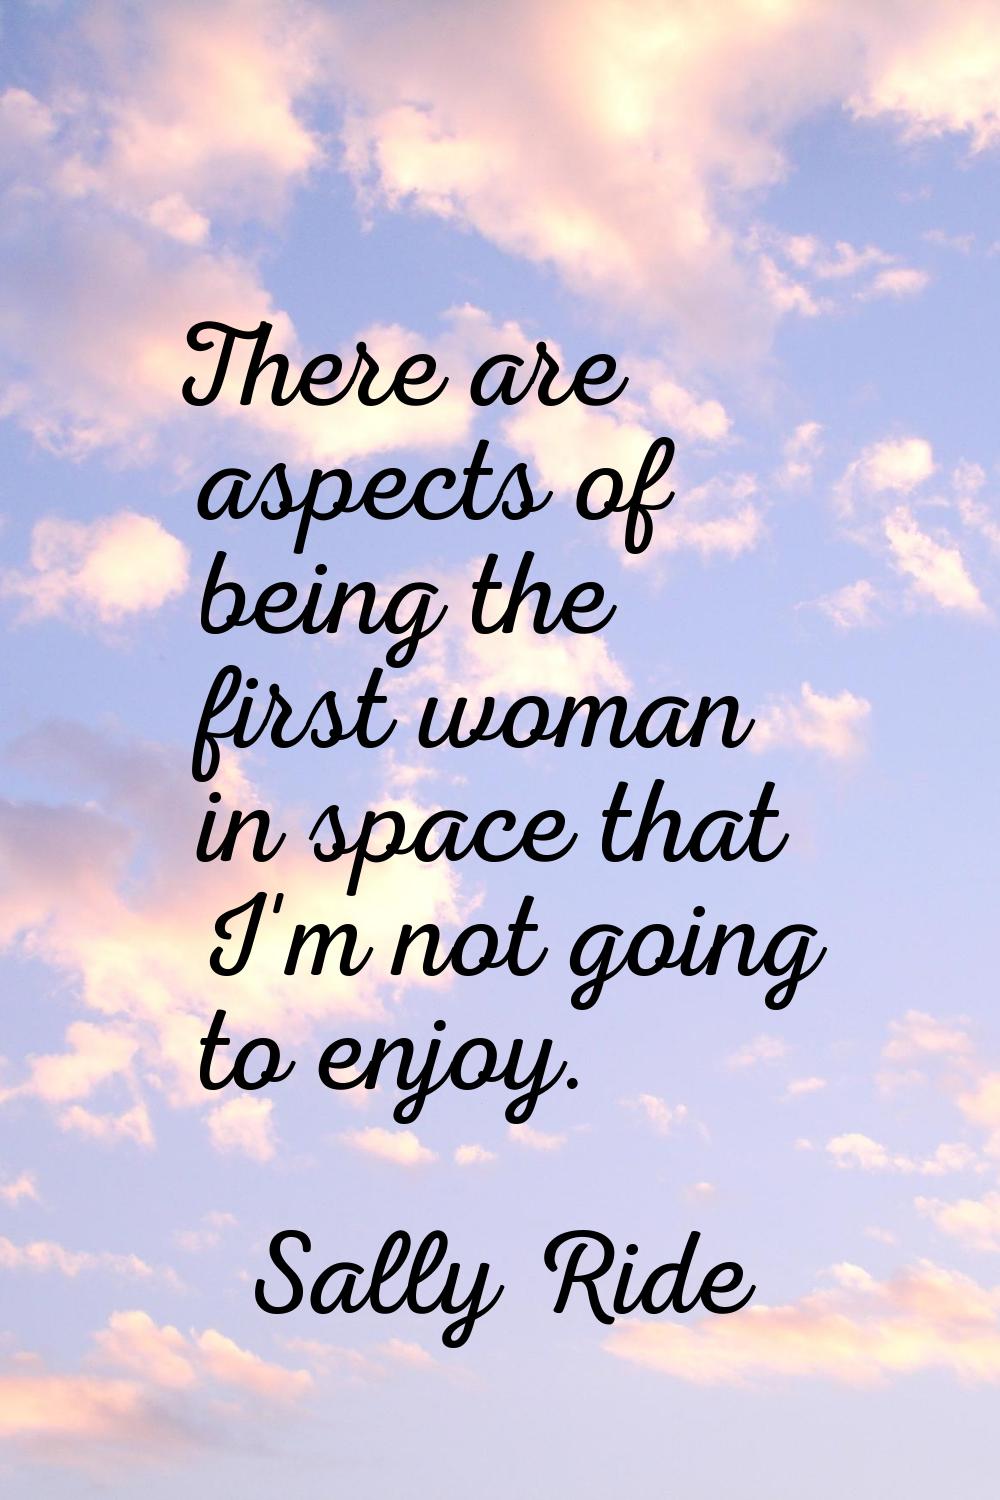 There are aspects of being the first woman in space that I'm not going to enjoy.